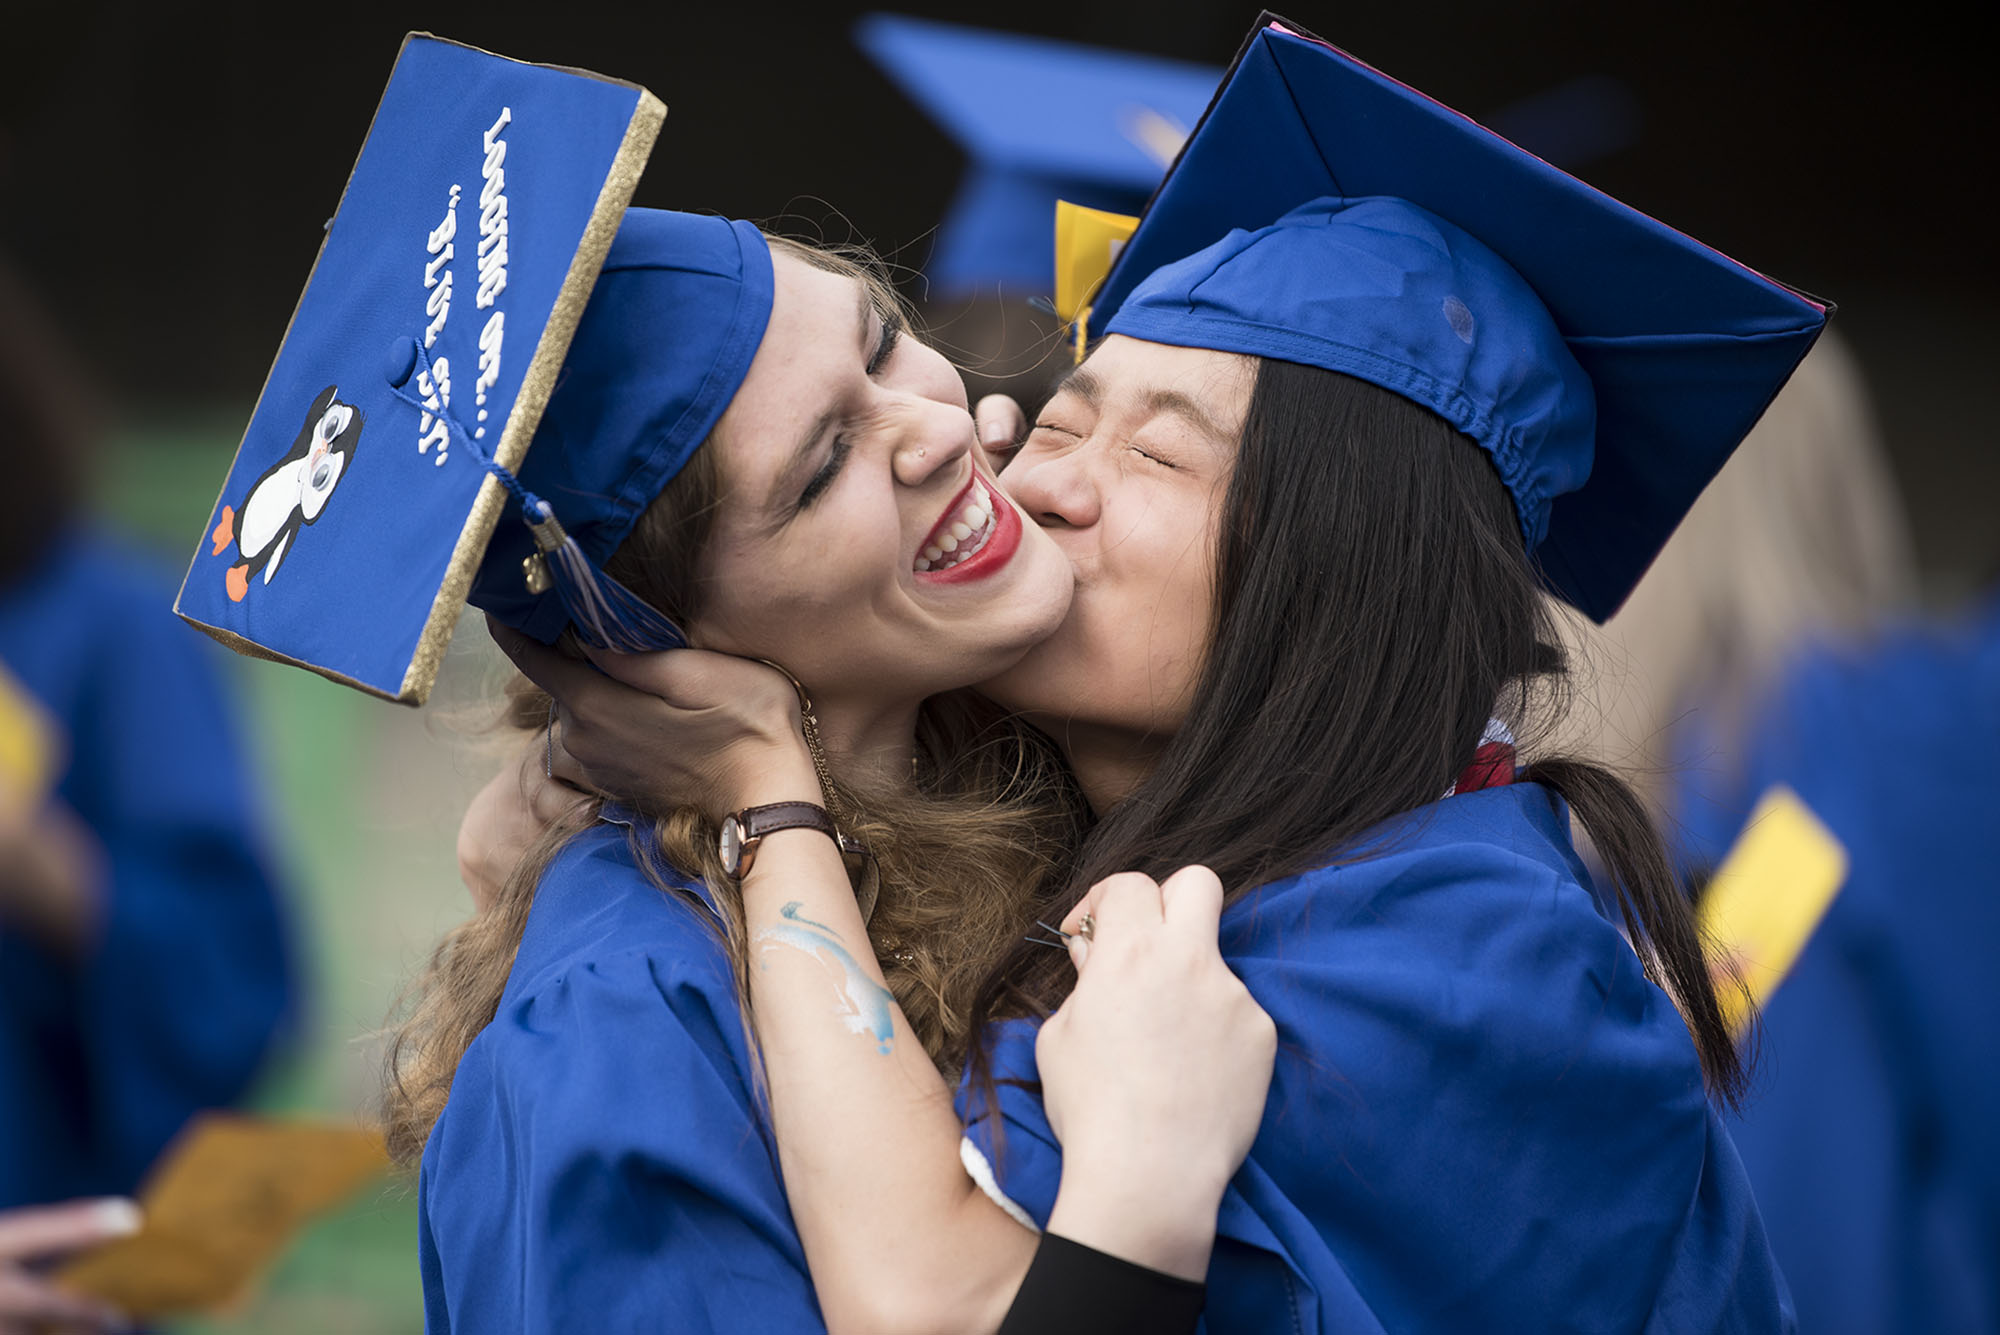 Lydia Straub, left, who is graduating with an Associate of Arts, tries to evade a kiss from Meizhi Teoh, right,  graduating with an Associate of Arts with honors, before the 2018 Clark College Commencement Ceremony at the Sunlight Supply Amphitheater on Thursday evening, June 21, 2018.